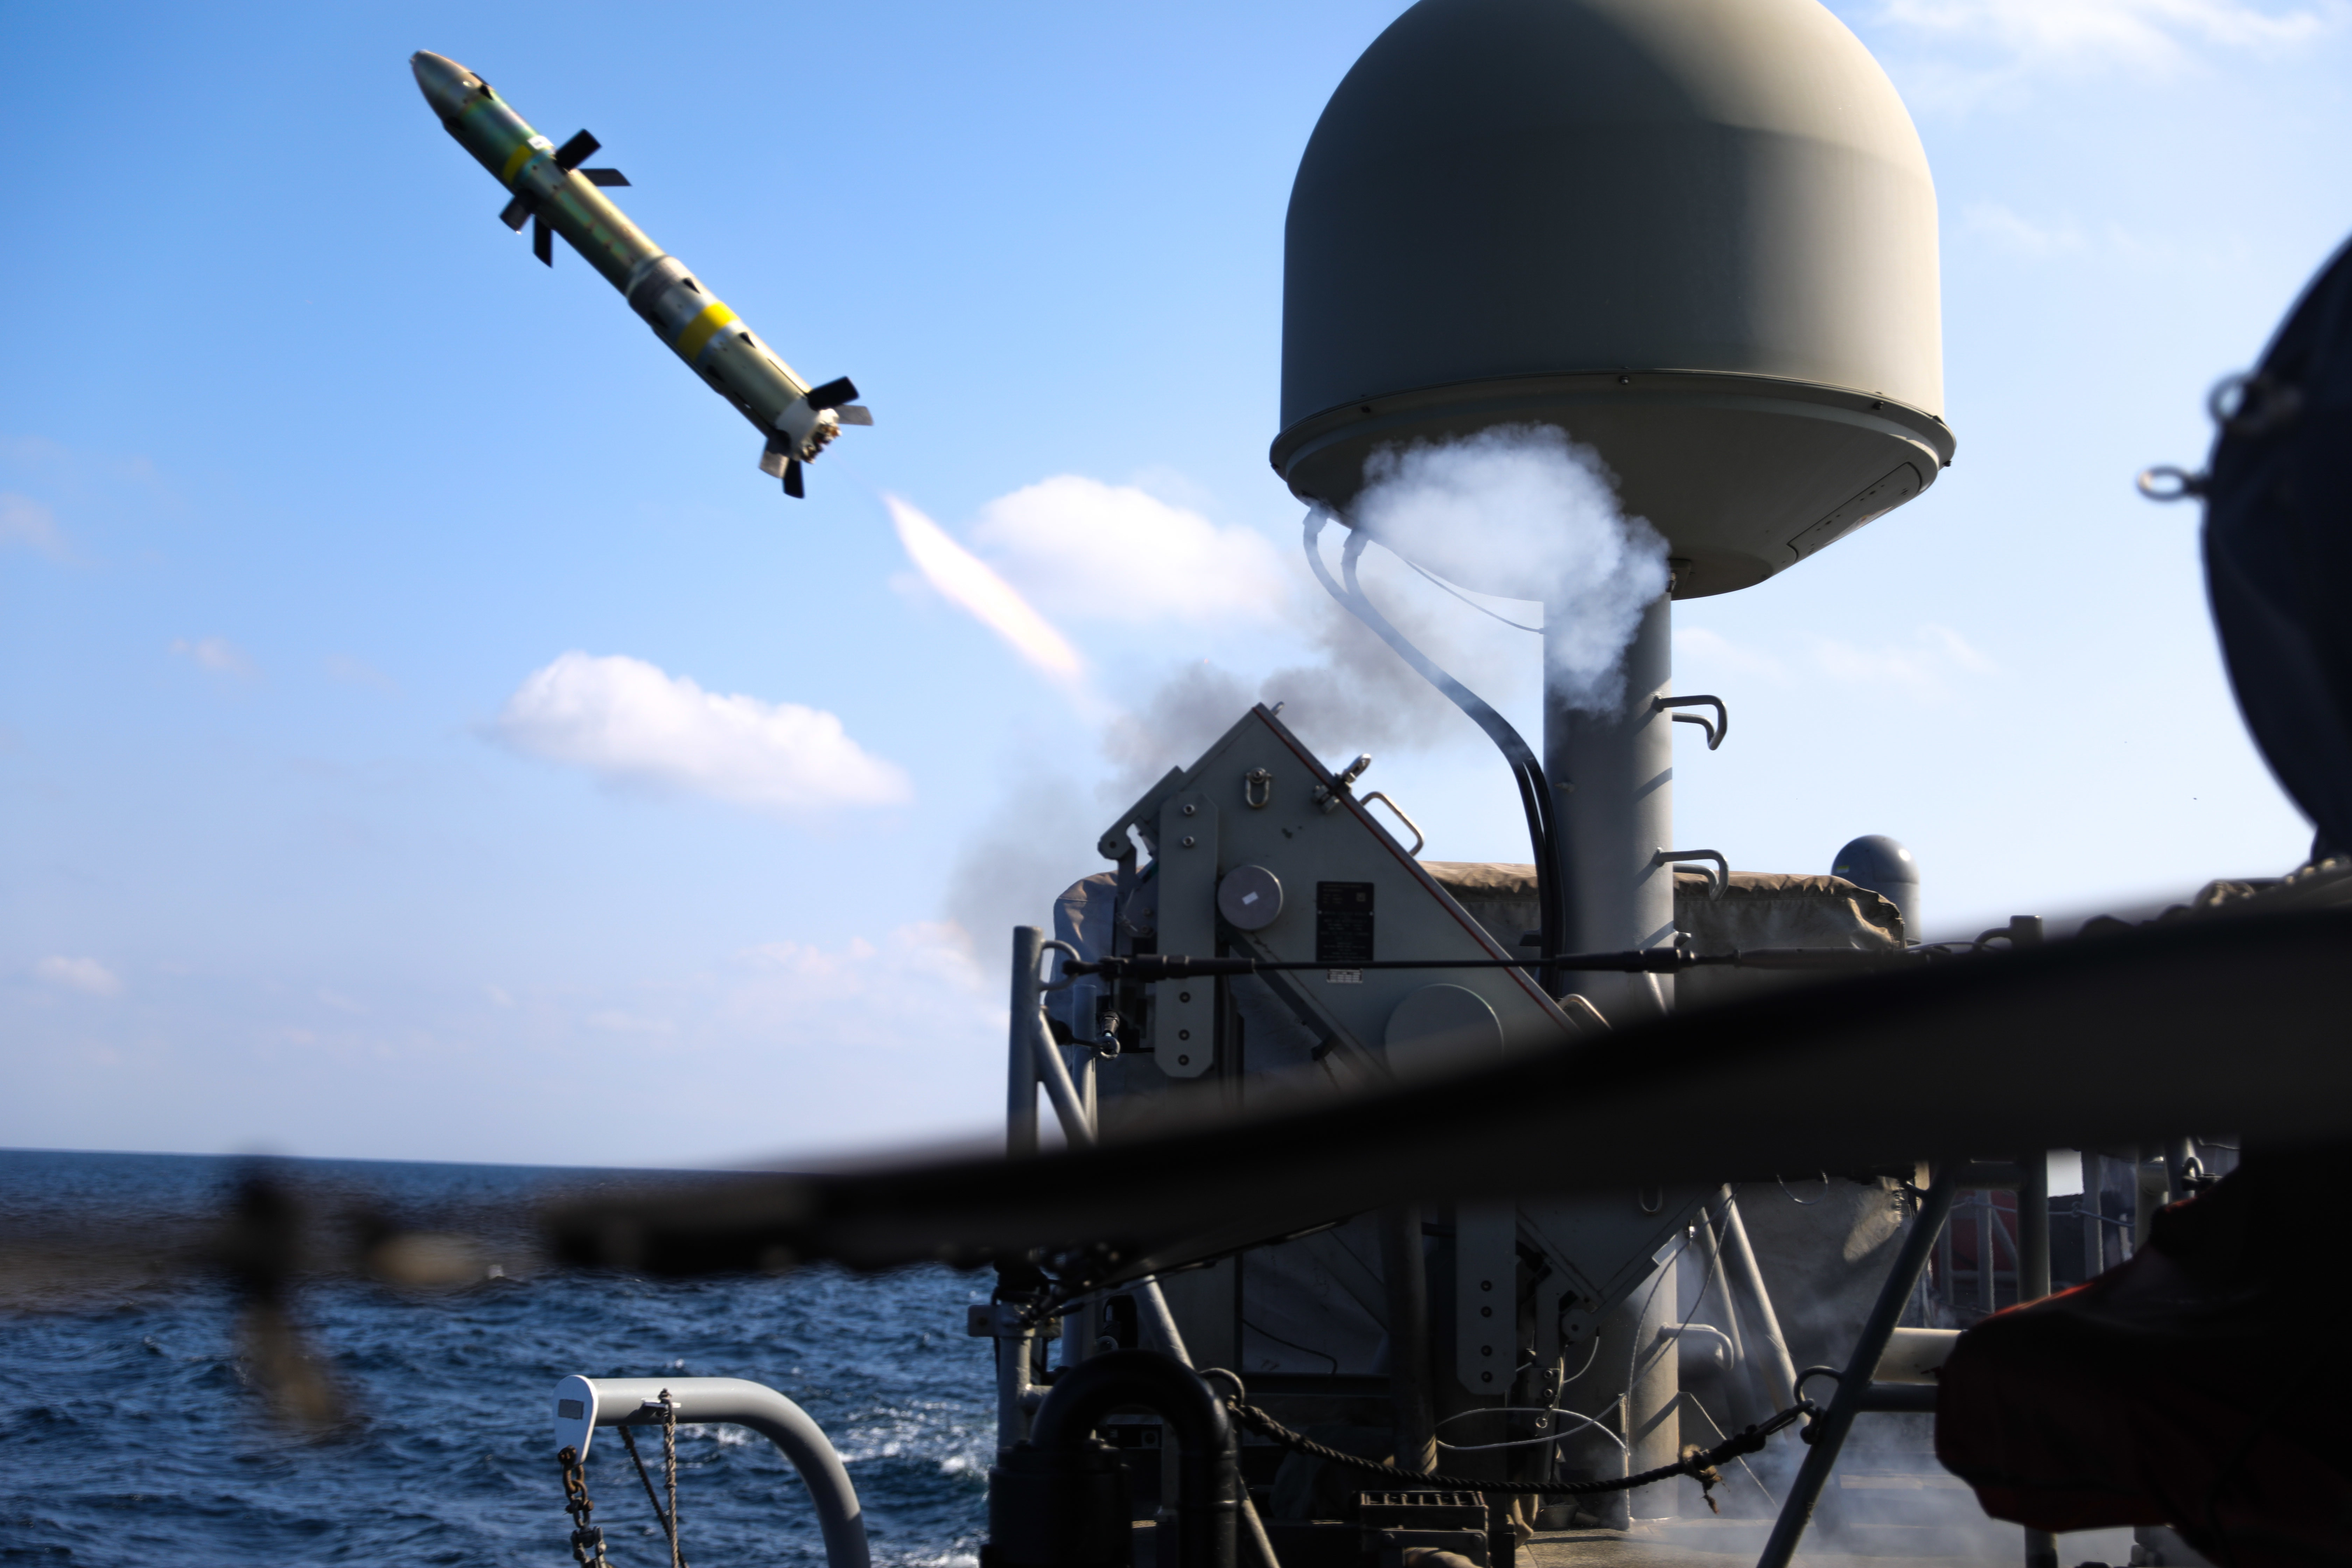 Griffin Missile Exercise 2019 > U.S. Naval Forces Central Command > Display